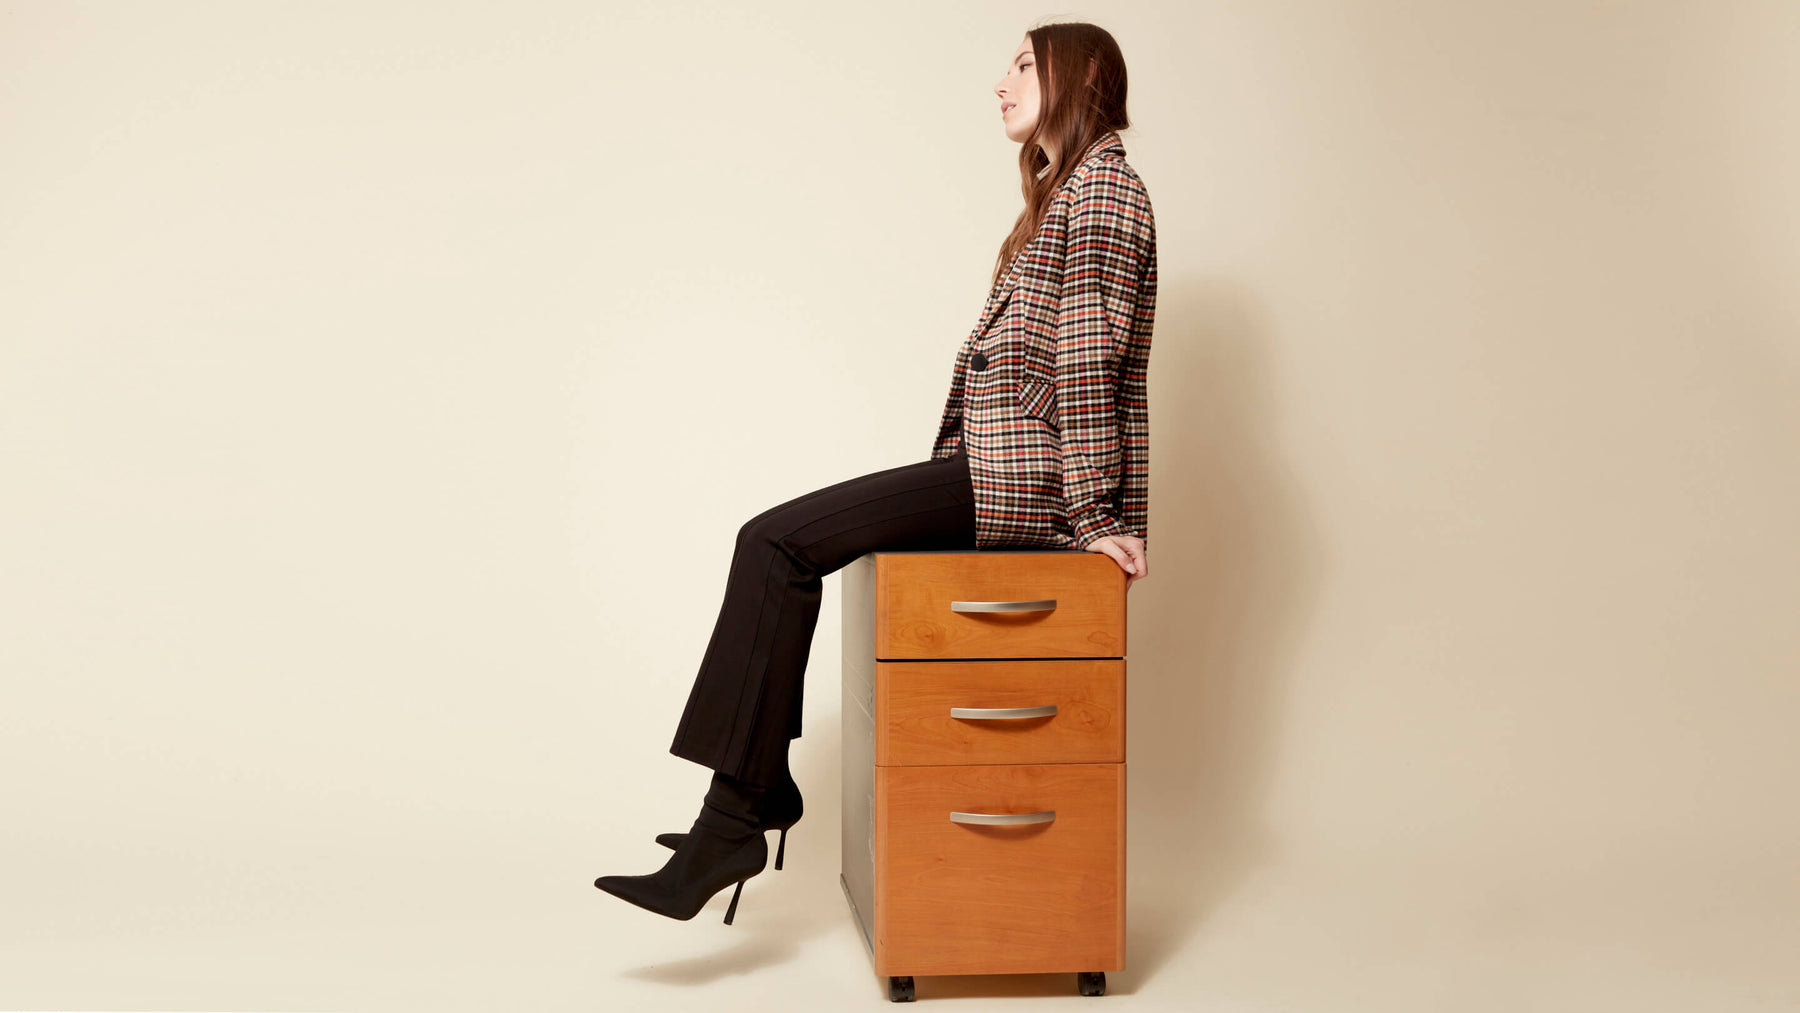 The Workwear Editorial - Women's Work Clothing & Office Outfits - Charlie B Collection